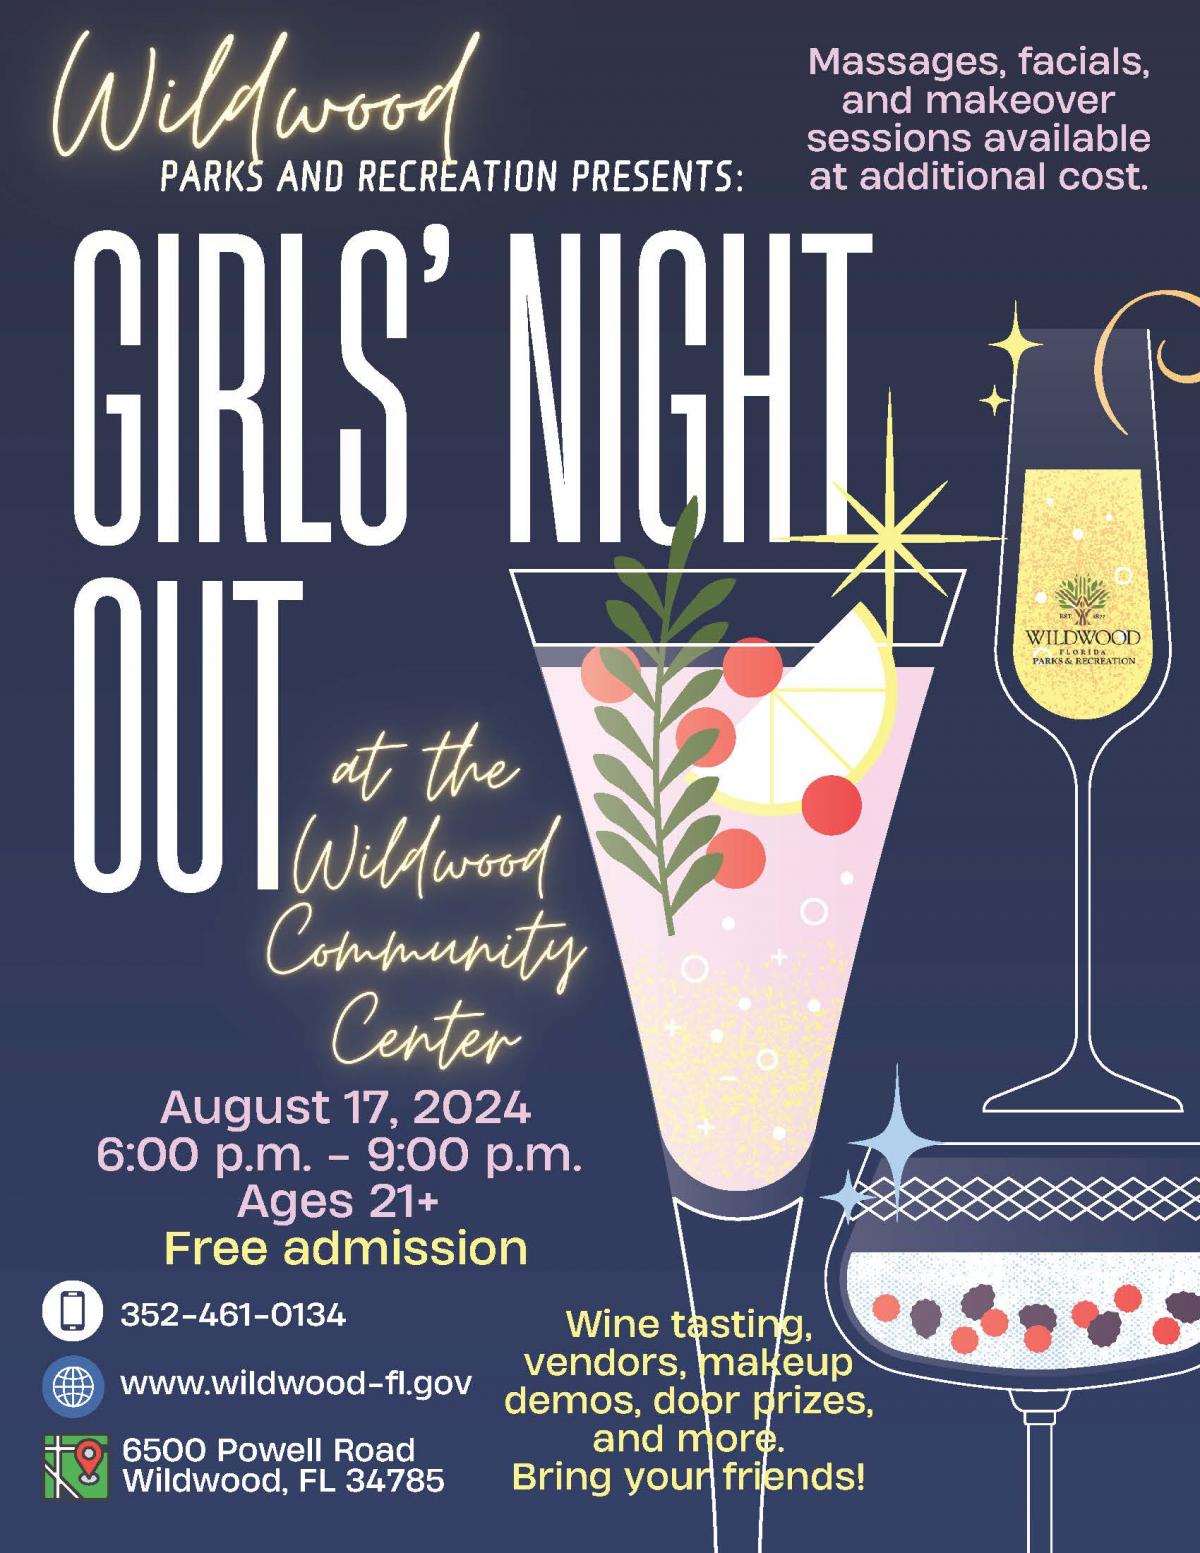 Girls’ Night Out, Saturday, August 17, 2024, Wildwood Community Center, 6500 Powell Road Wildwood, Fl 34785, 6-9 p.m.